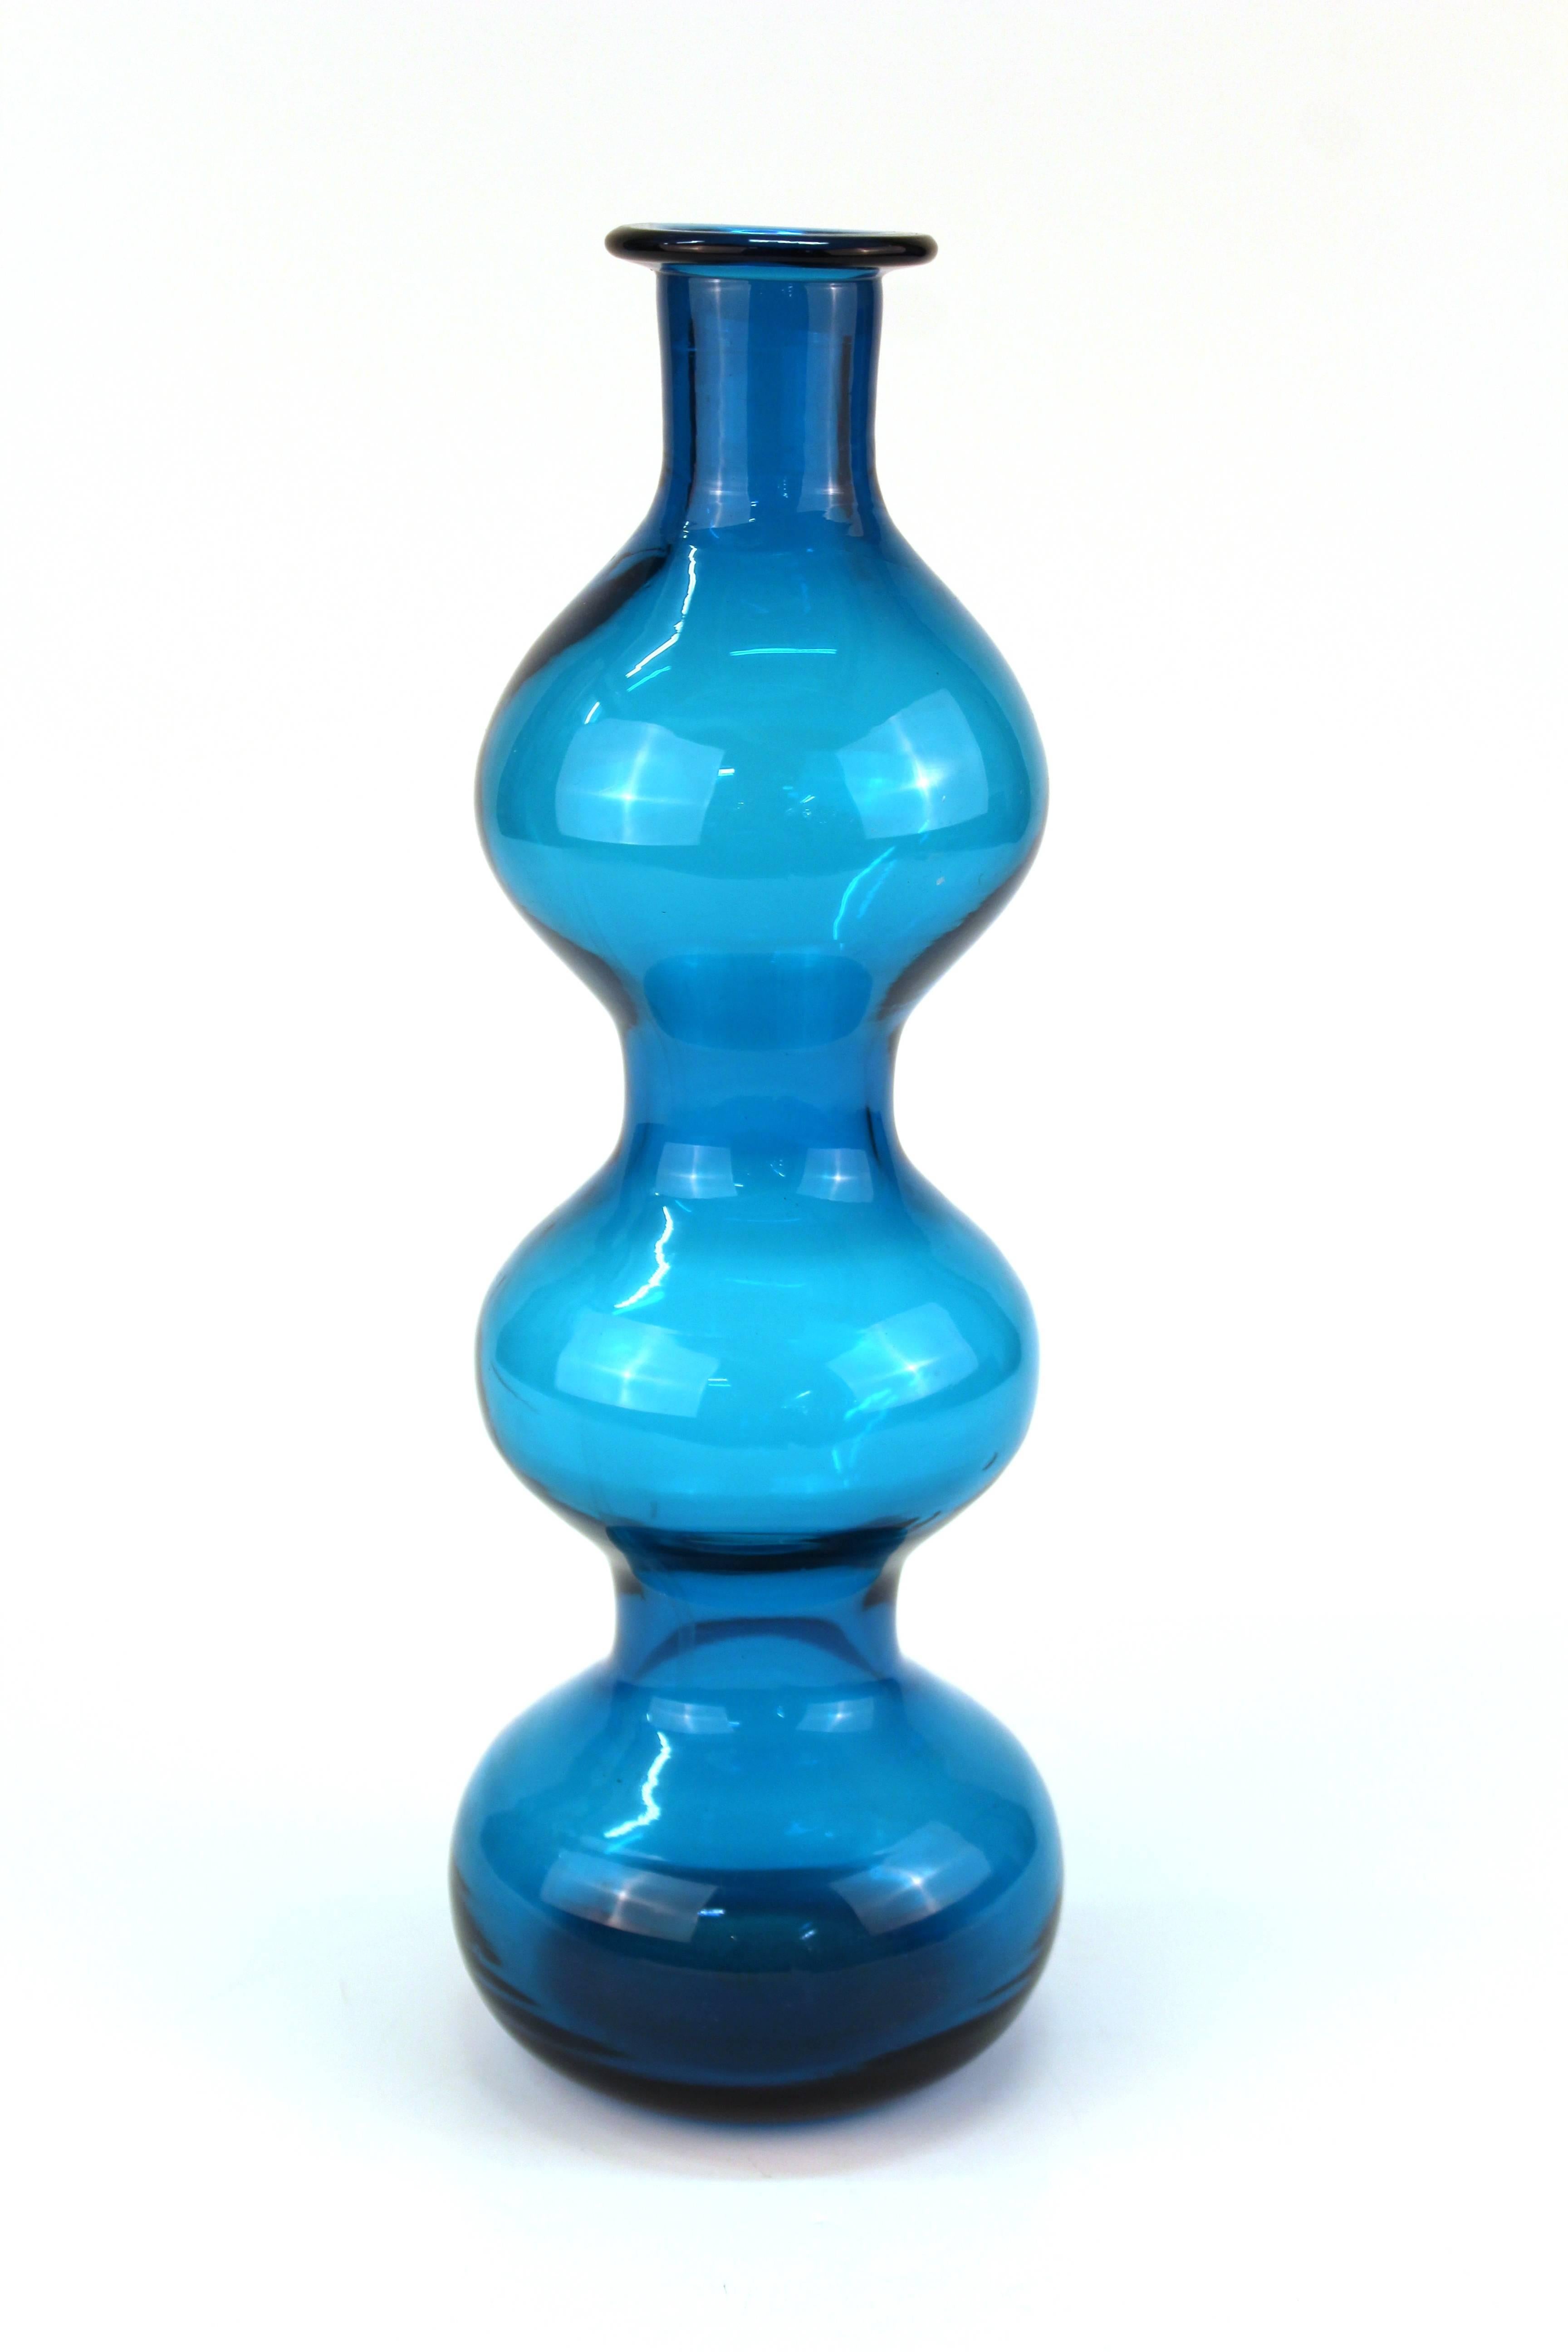 Mid-Century Modern Blenko glass bottle, dating from the 1950s, in blue-green color, in shape of three stacked orbs. The piece has some minor scuffing inside the neck, possibly from a stopper. In good vintage condition.